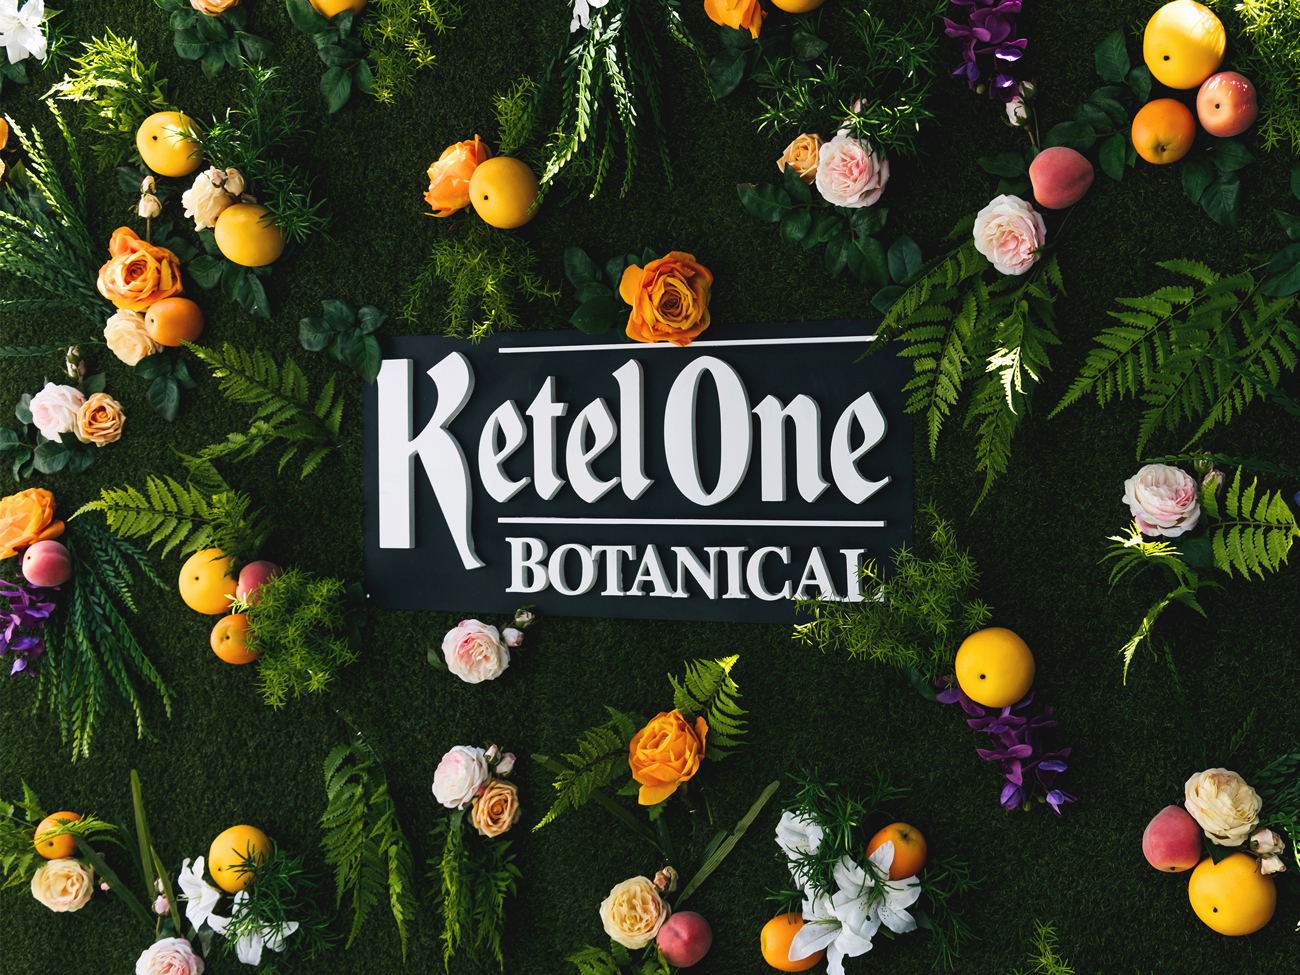 ketel-one_xm_botanical_by-catherine-bisaillon_1300x975_002